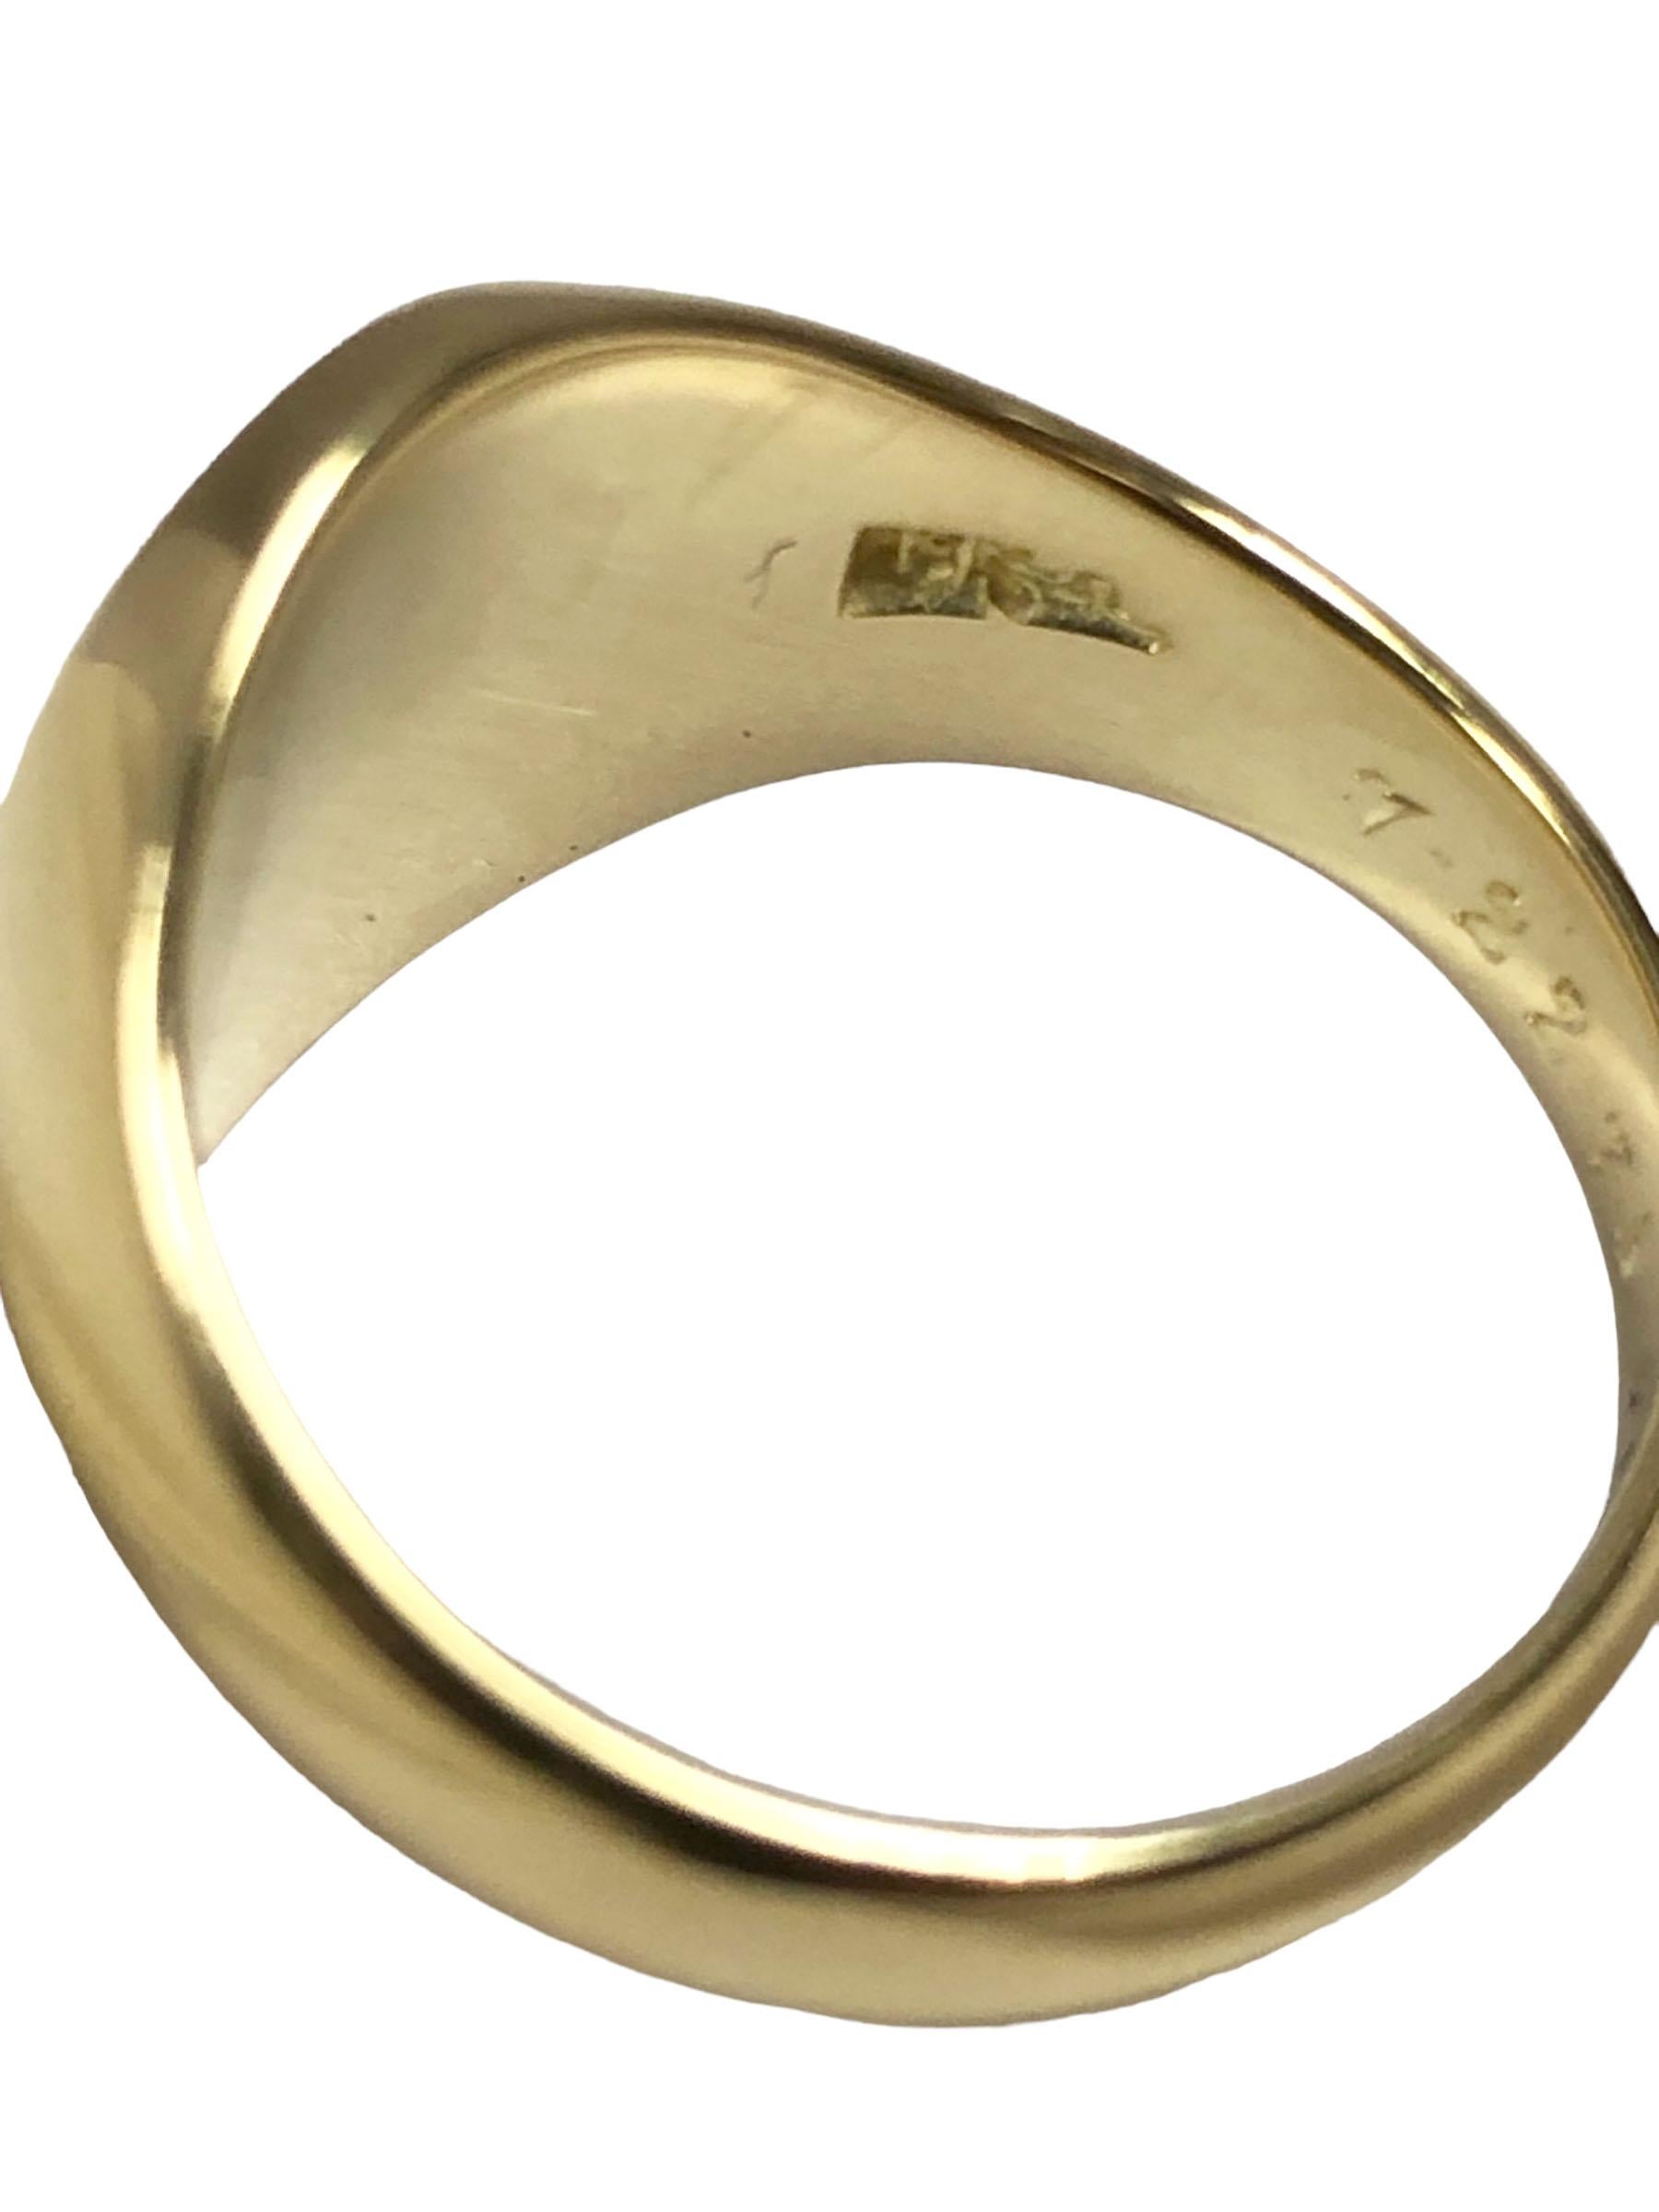 Cartier Vintage Yellow Gold Signet Ring 1